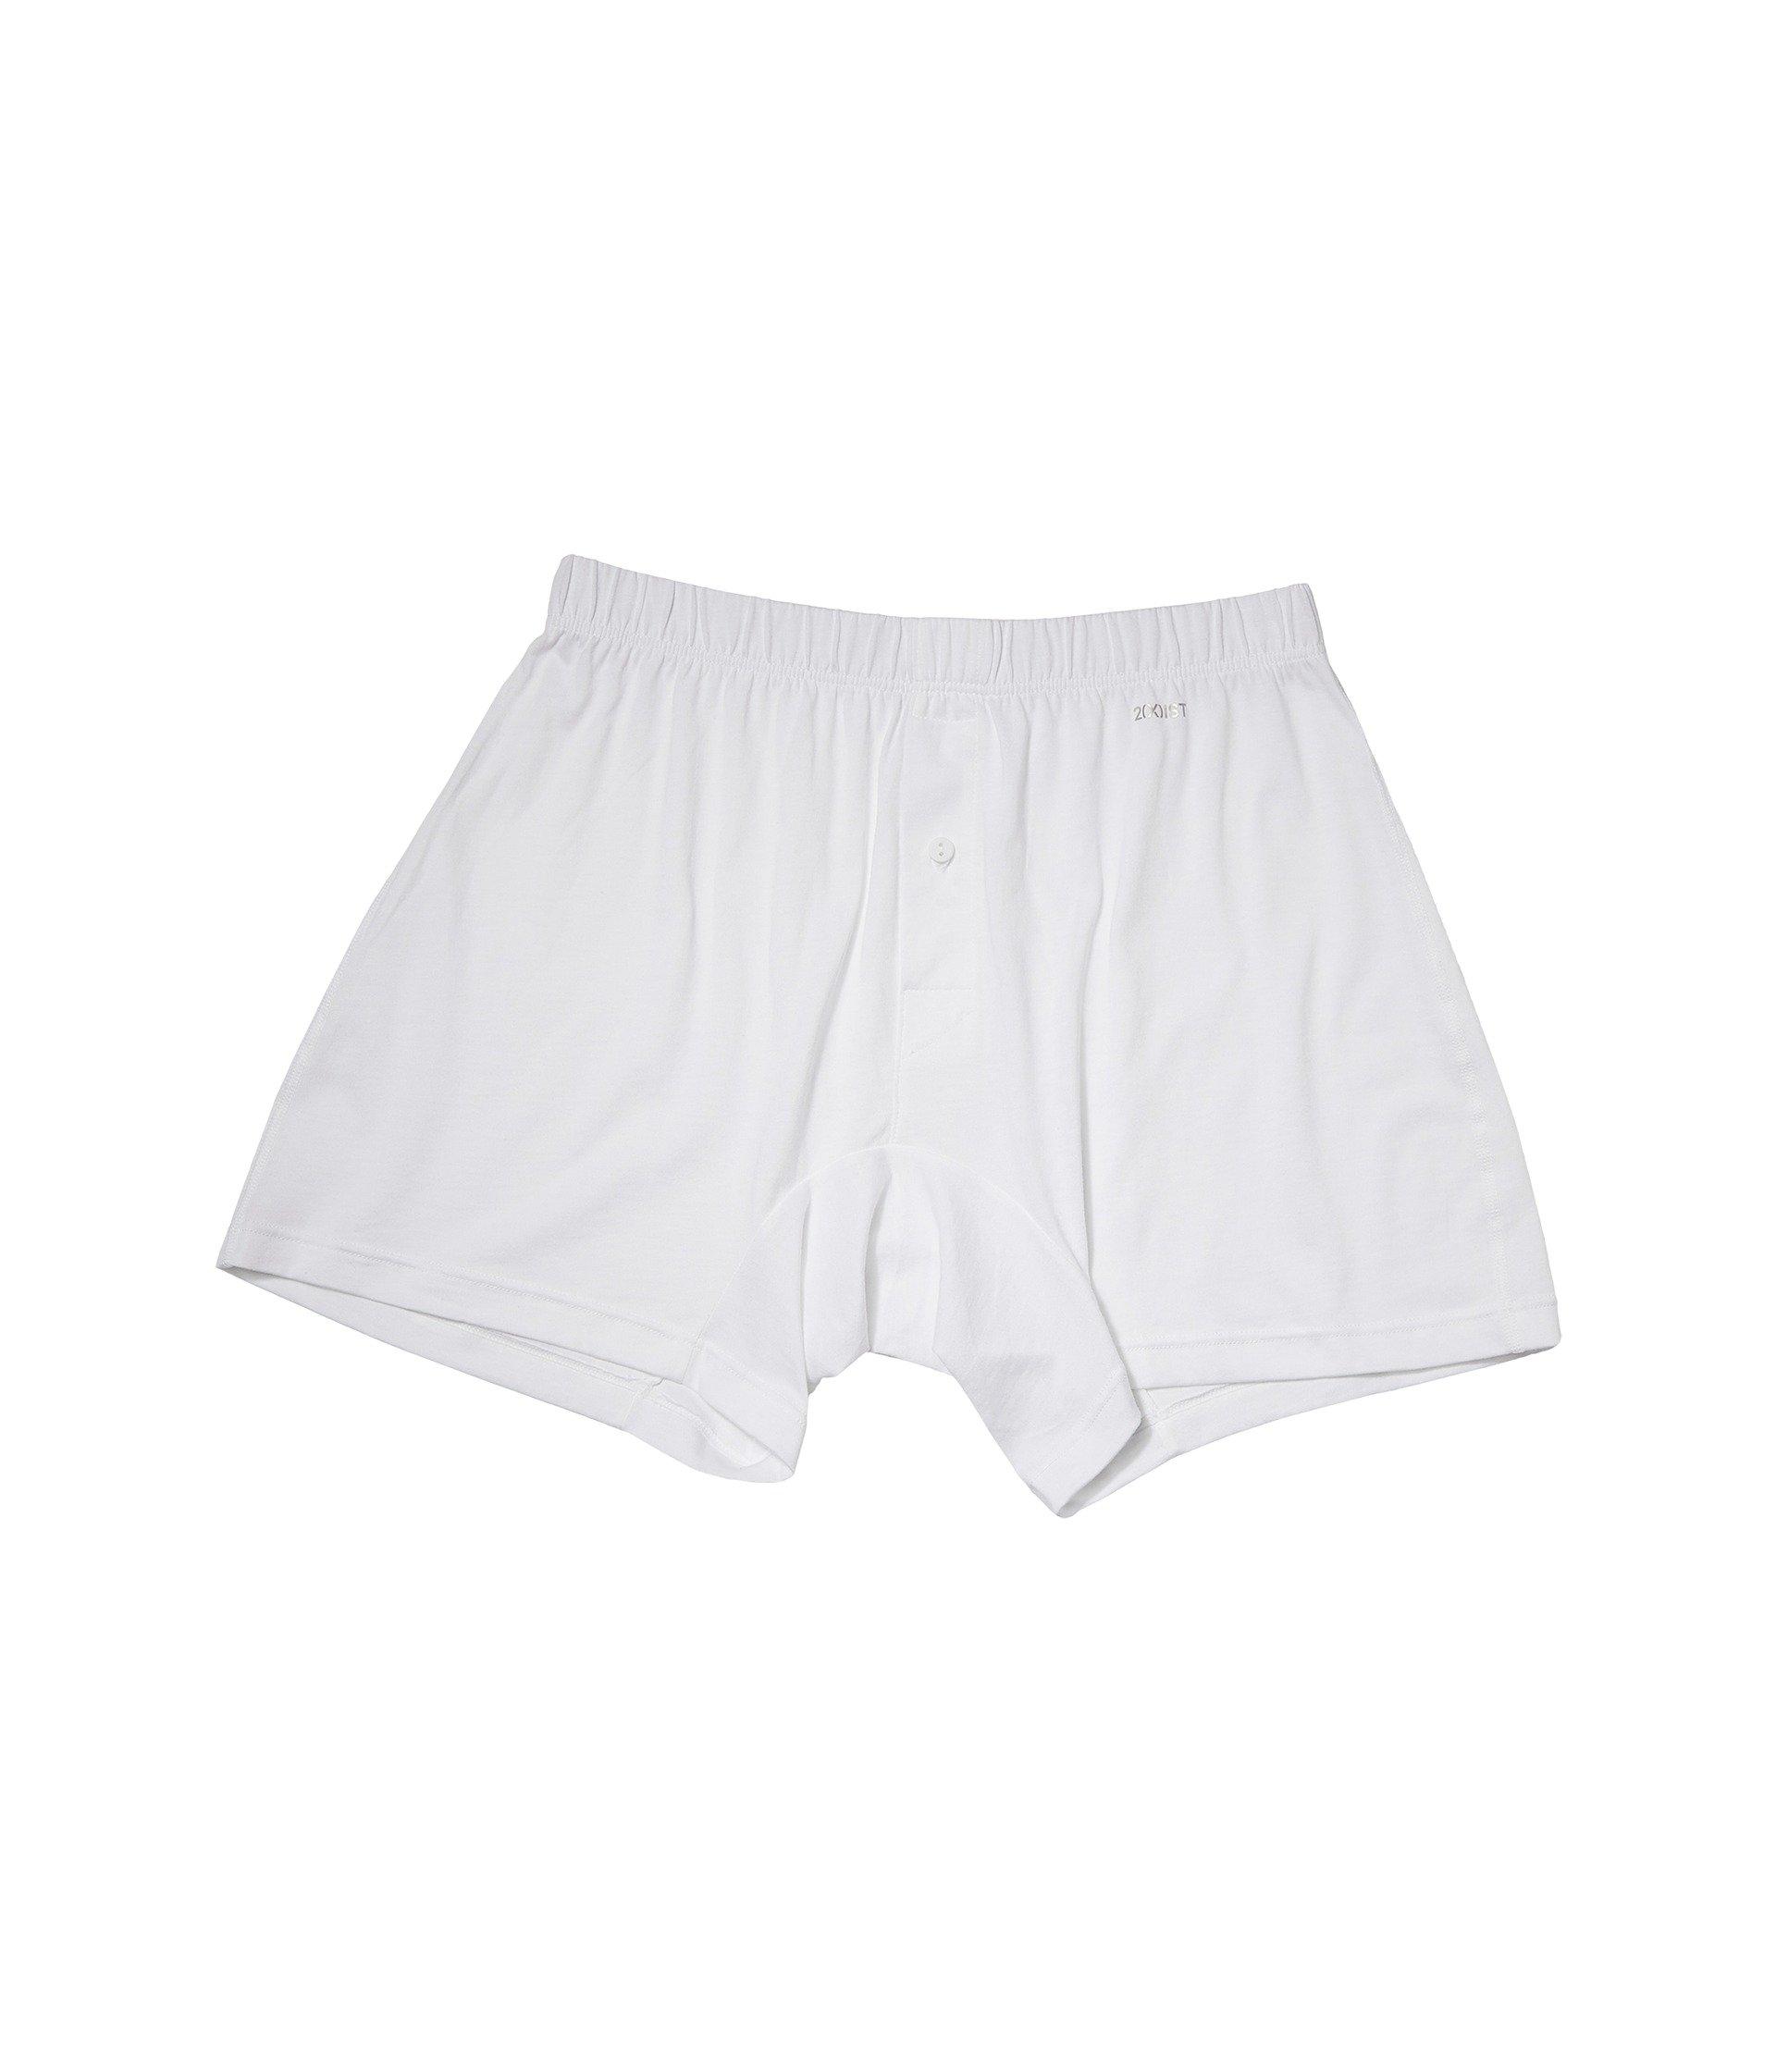 2xist Cotton 2(x)ist Pima Knit Boxer in White for Men - Lyst